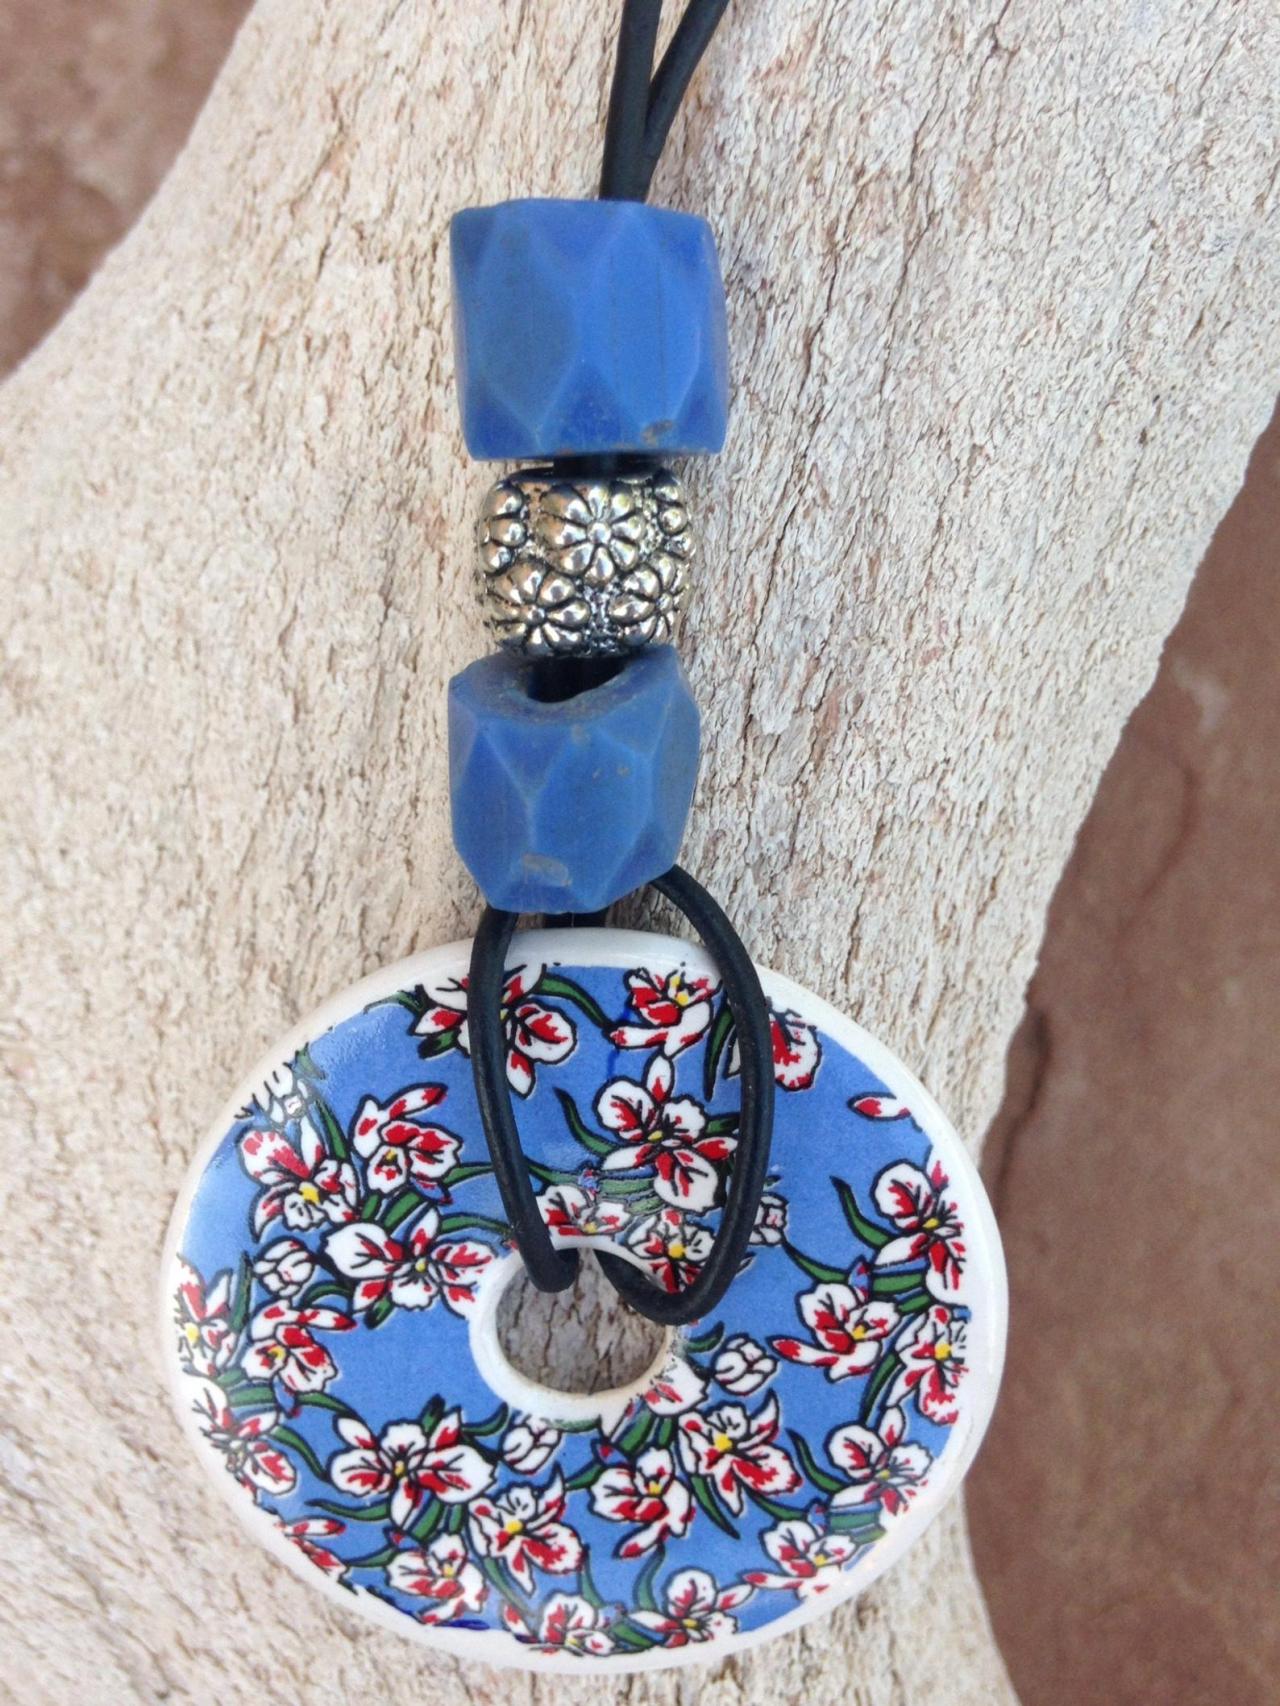 Leather Necklace/bohemian Jewelry/ Boho Necklace/ 20" 1.5 Mm Leather Cord Necklace With 1 3/4" Detailed Ceramic Floral